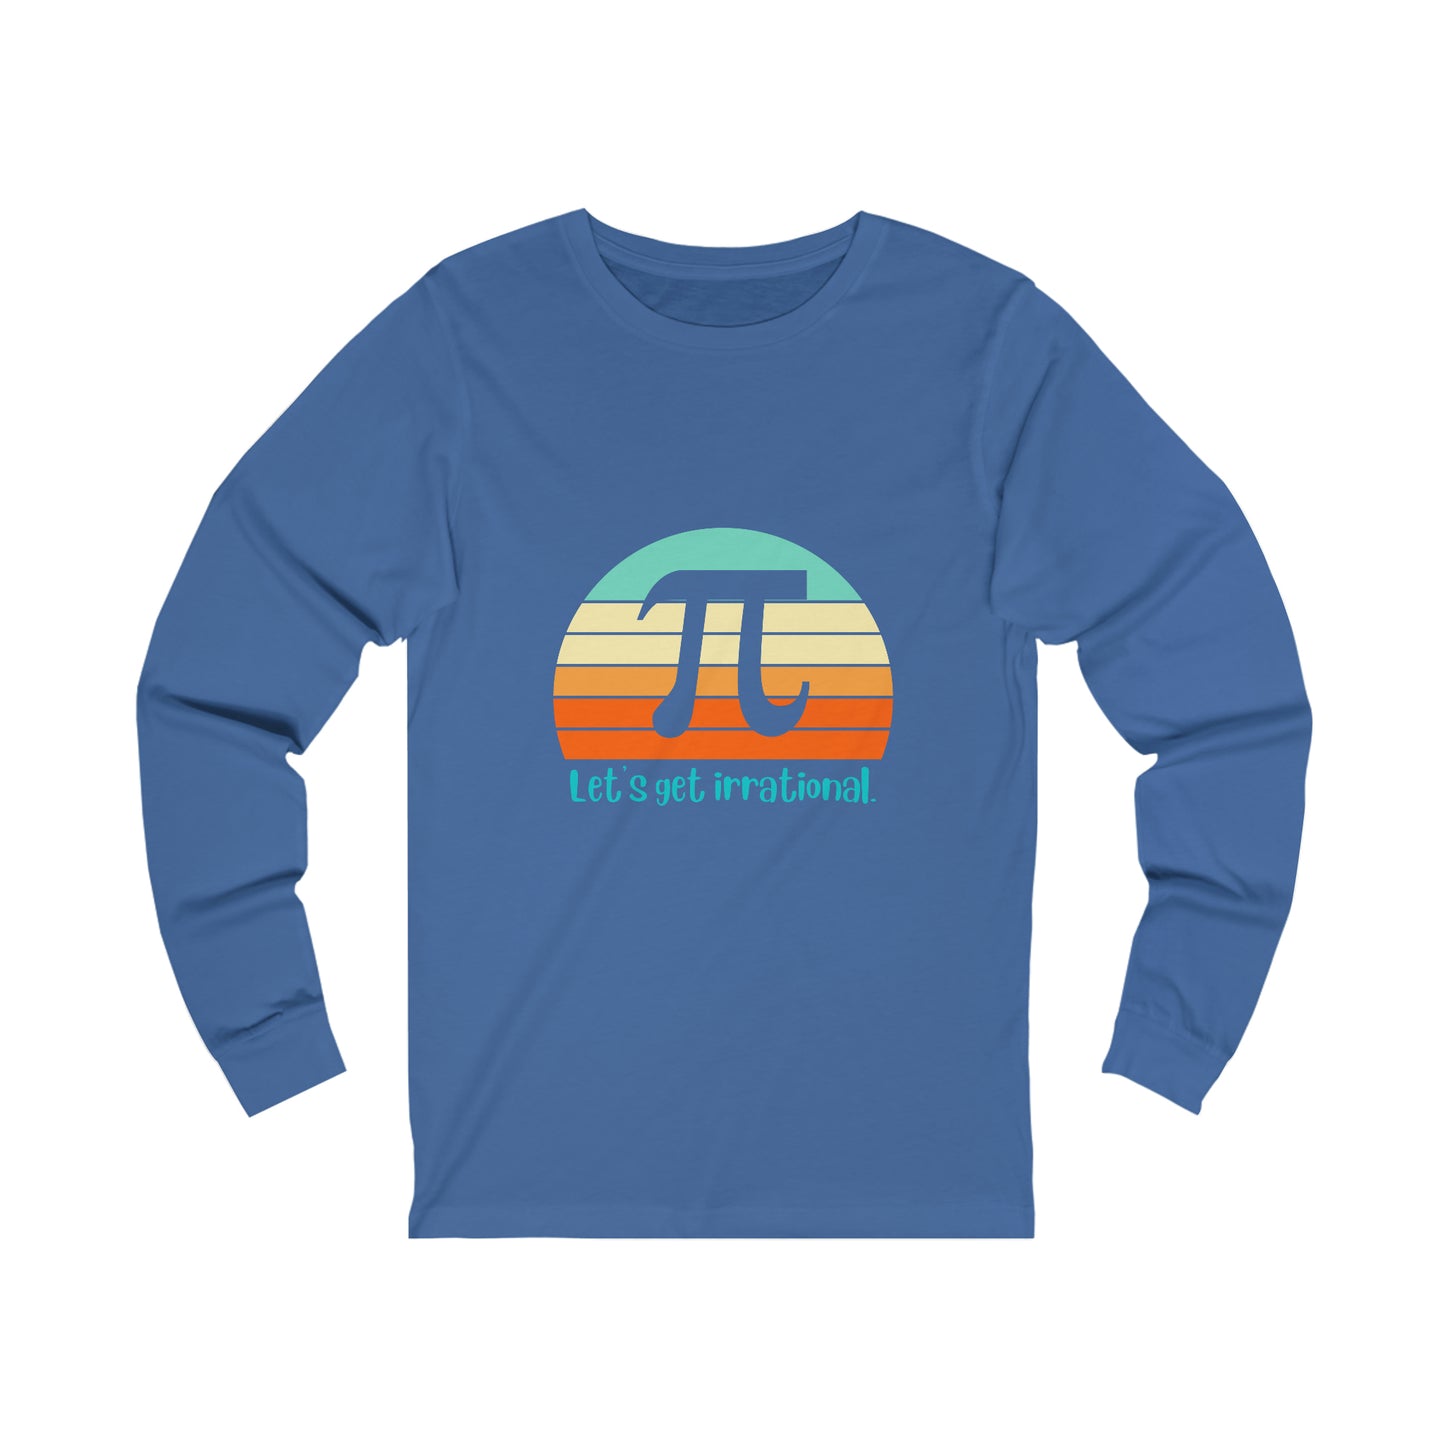 Let's Get Irrational Unisex Jersey Long Sleeve Tee